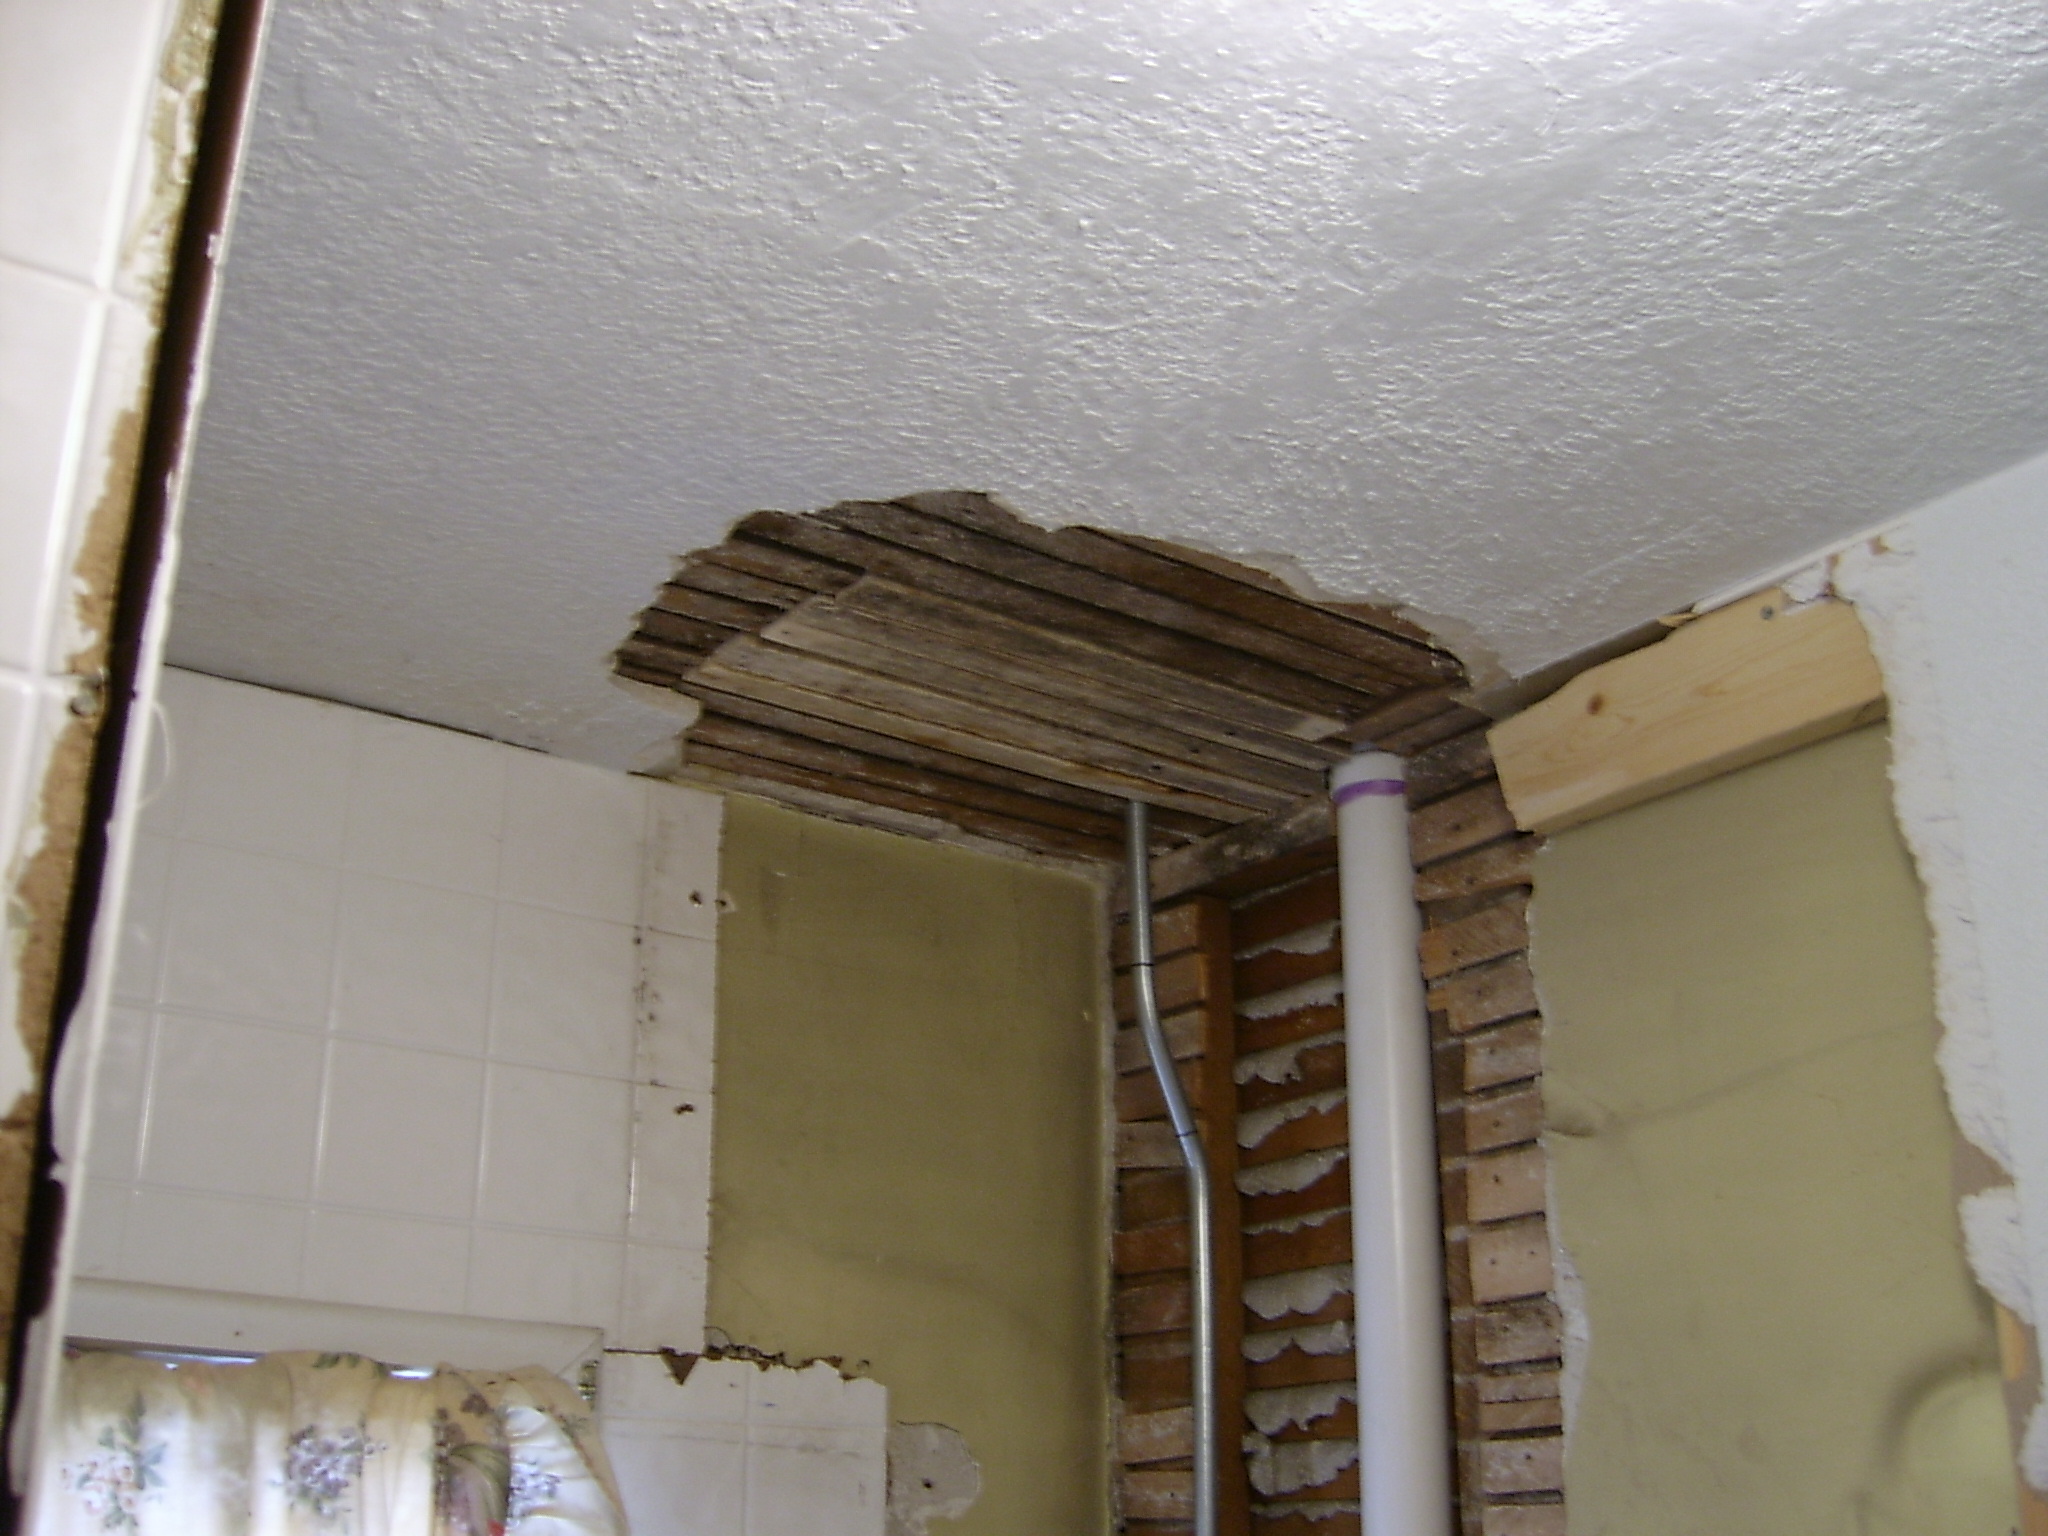 Bathroom – Plumbing – Wall Repair - Our Old Victorian Plumbing And Electrical In Same Wall Cavity